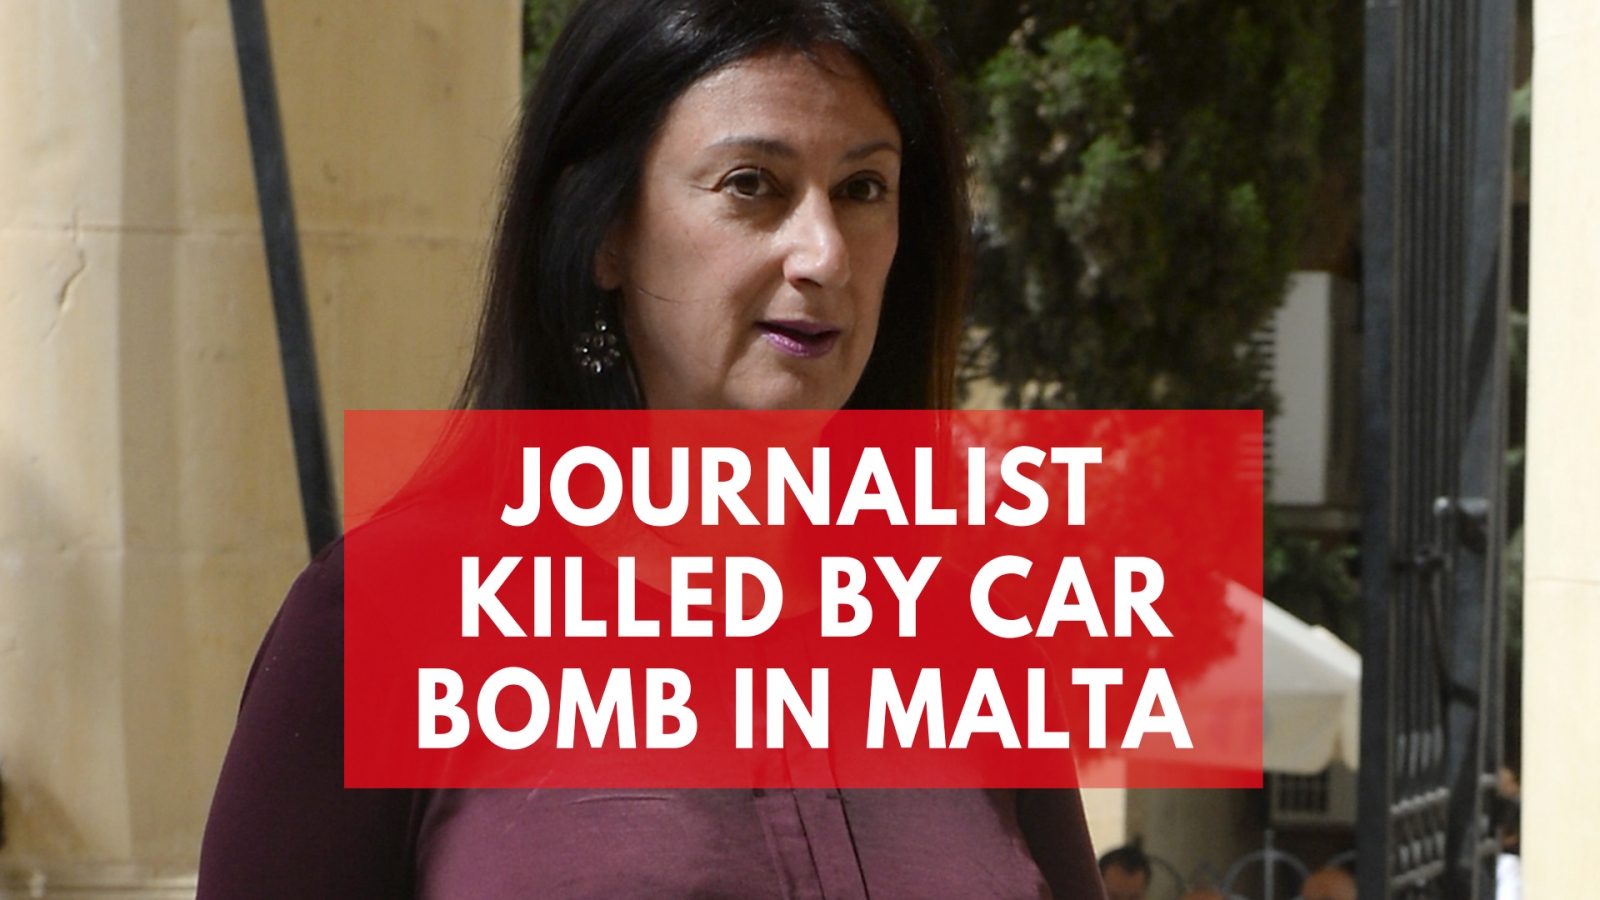 Malta The Murder Of Journalist Daphne Galizia Exposed The Dark Side Of The Holiday Island